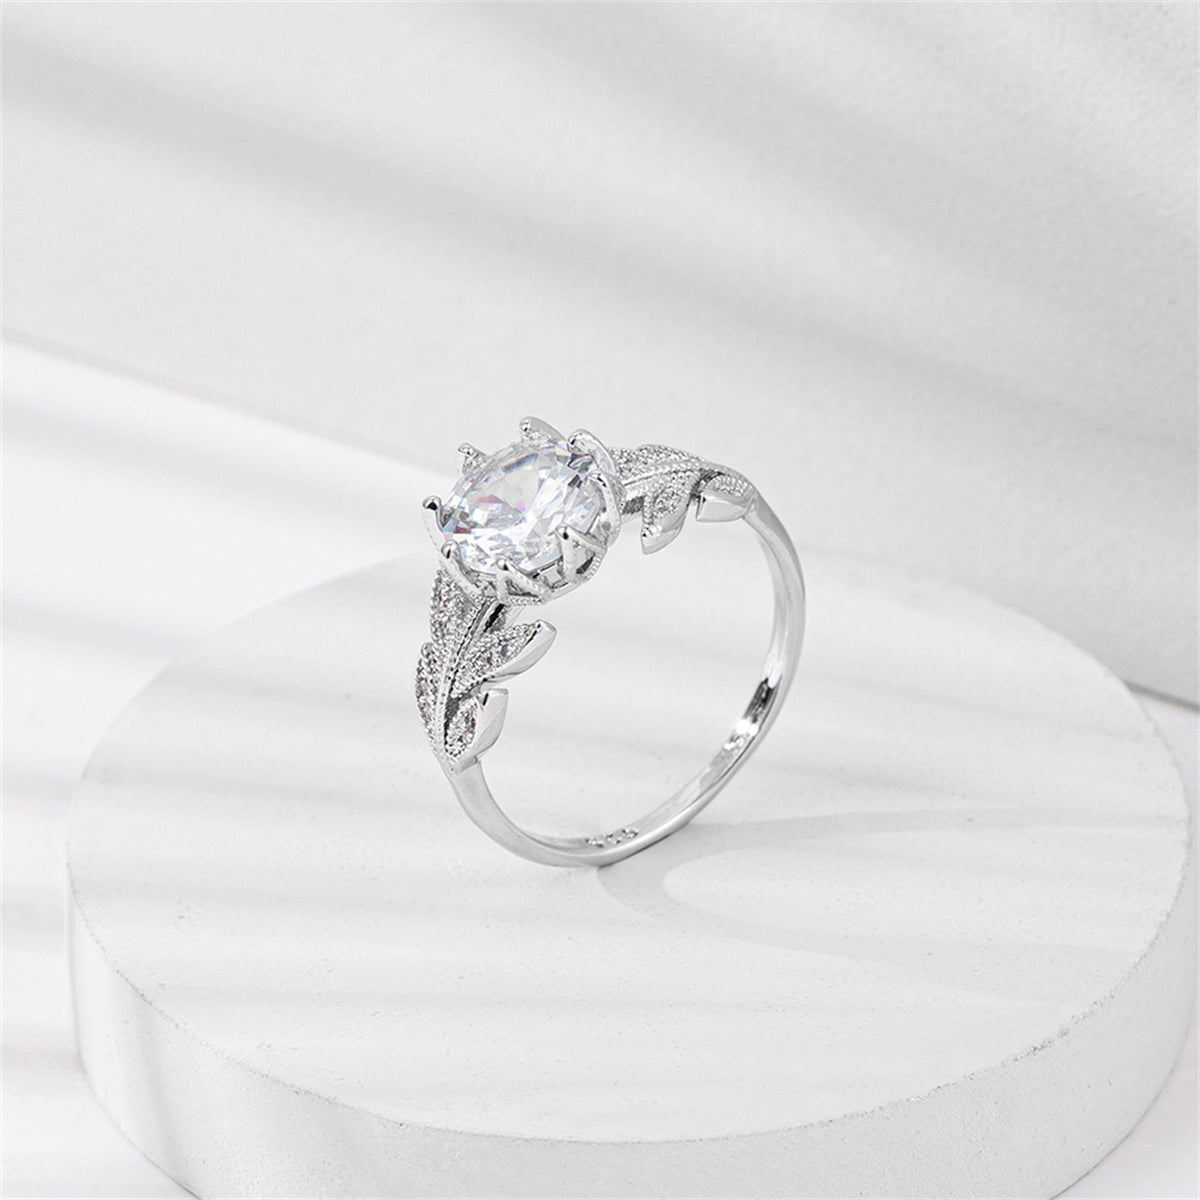 Crystal & Silver-Plated Prong-Set Floral Cocktail Ring